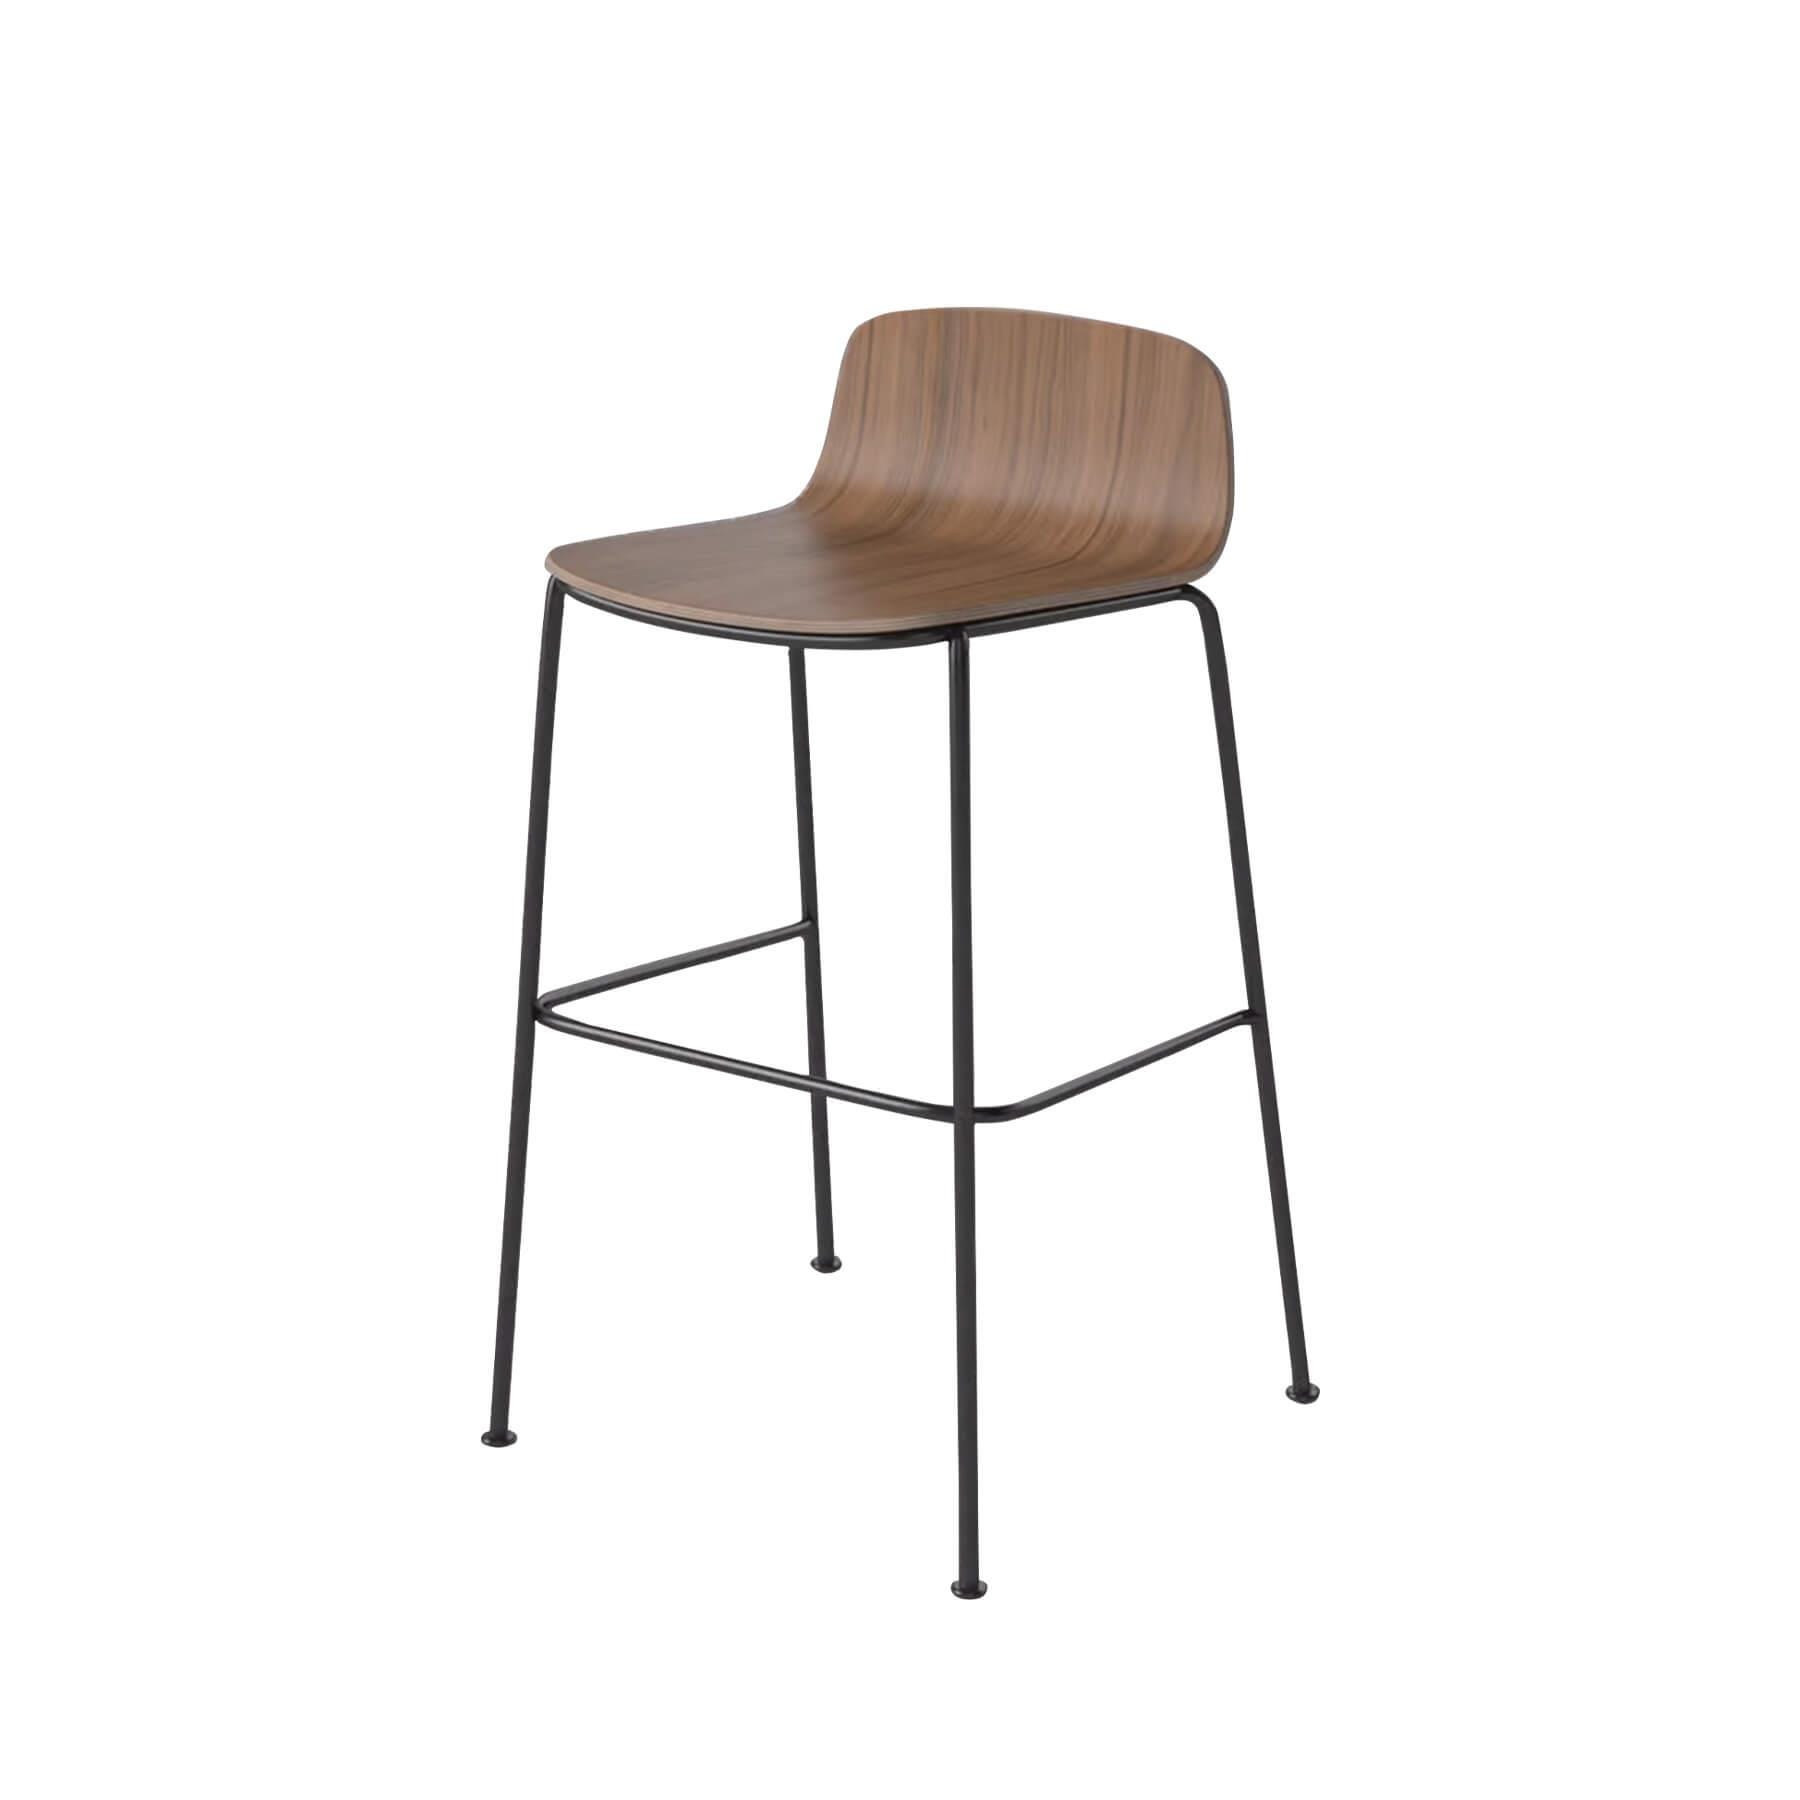 Bolia Palm Stool Kitchen Counter Stool Oiled Walnut Black Laquered Legs Dark Wood Designer Furniture From Holloways Of Ludlow